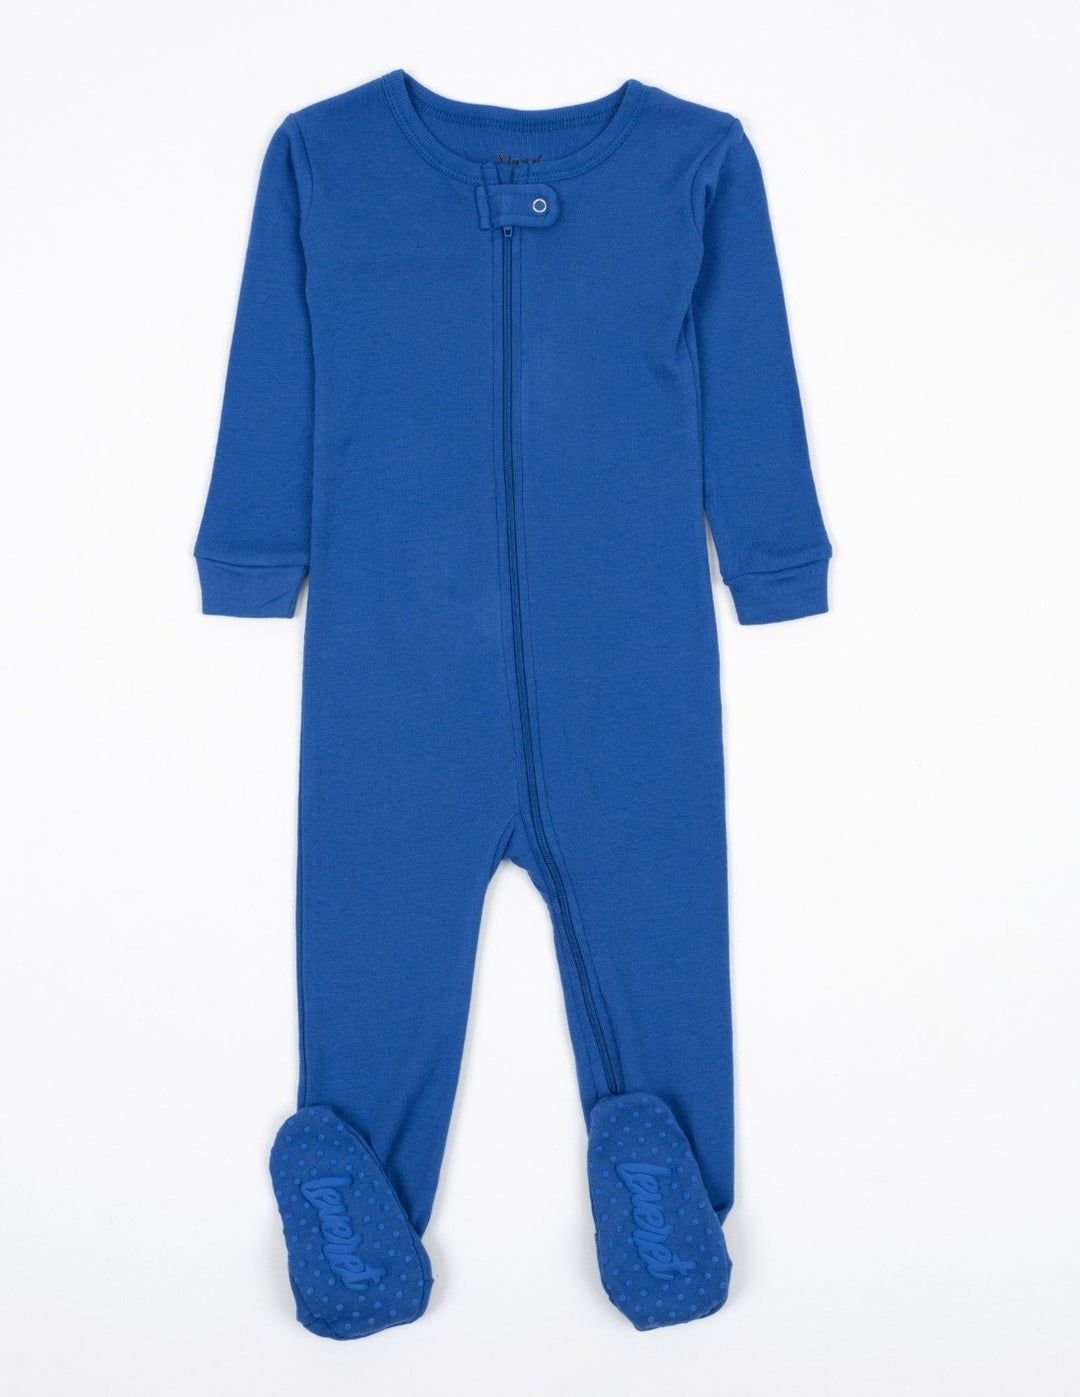 solid color blue baby footed pajamas